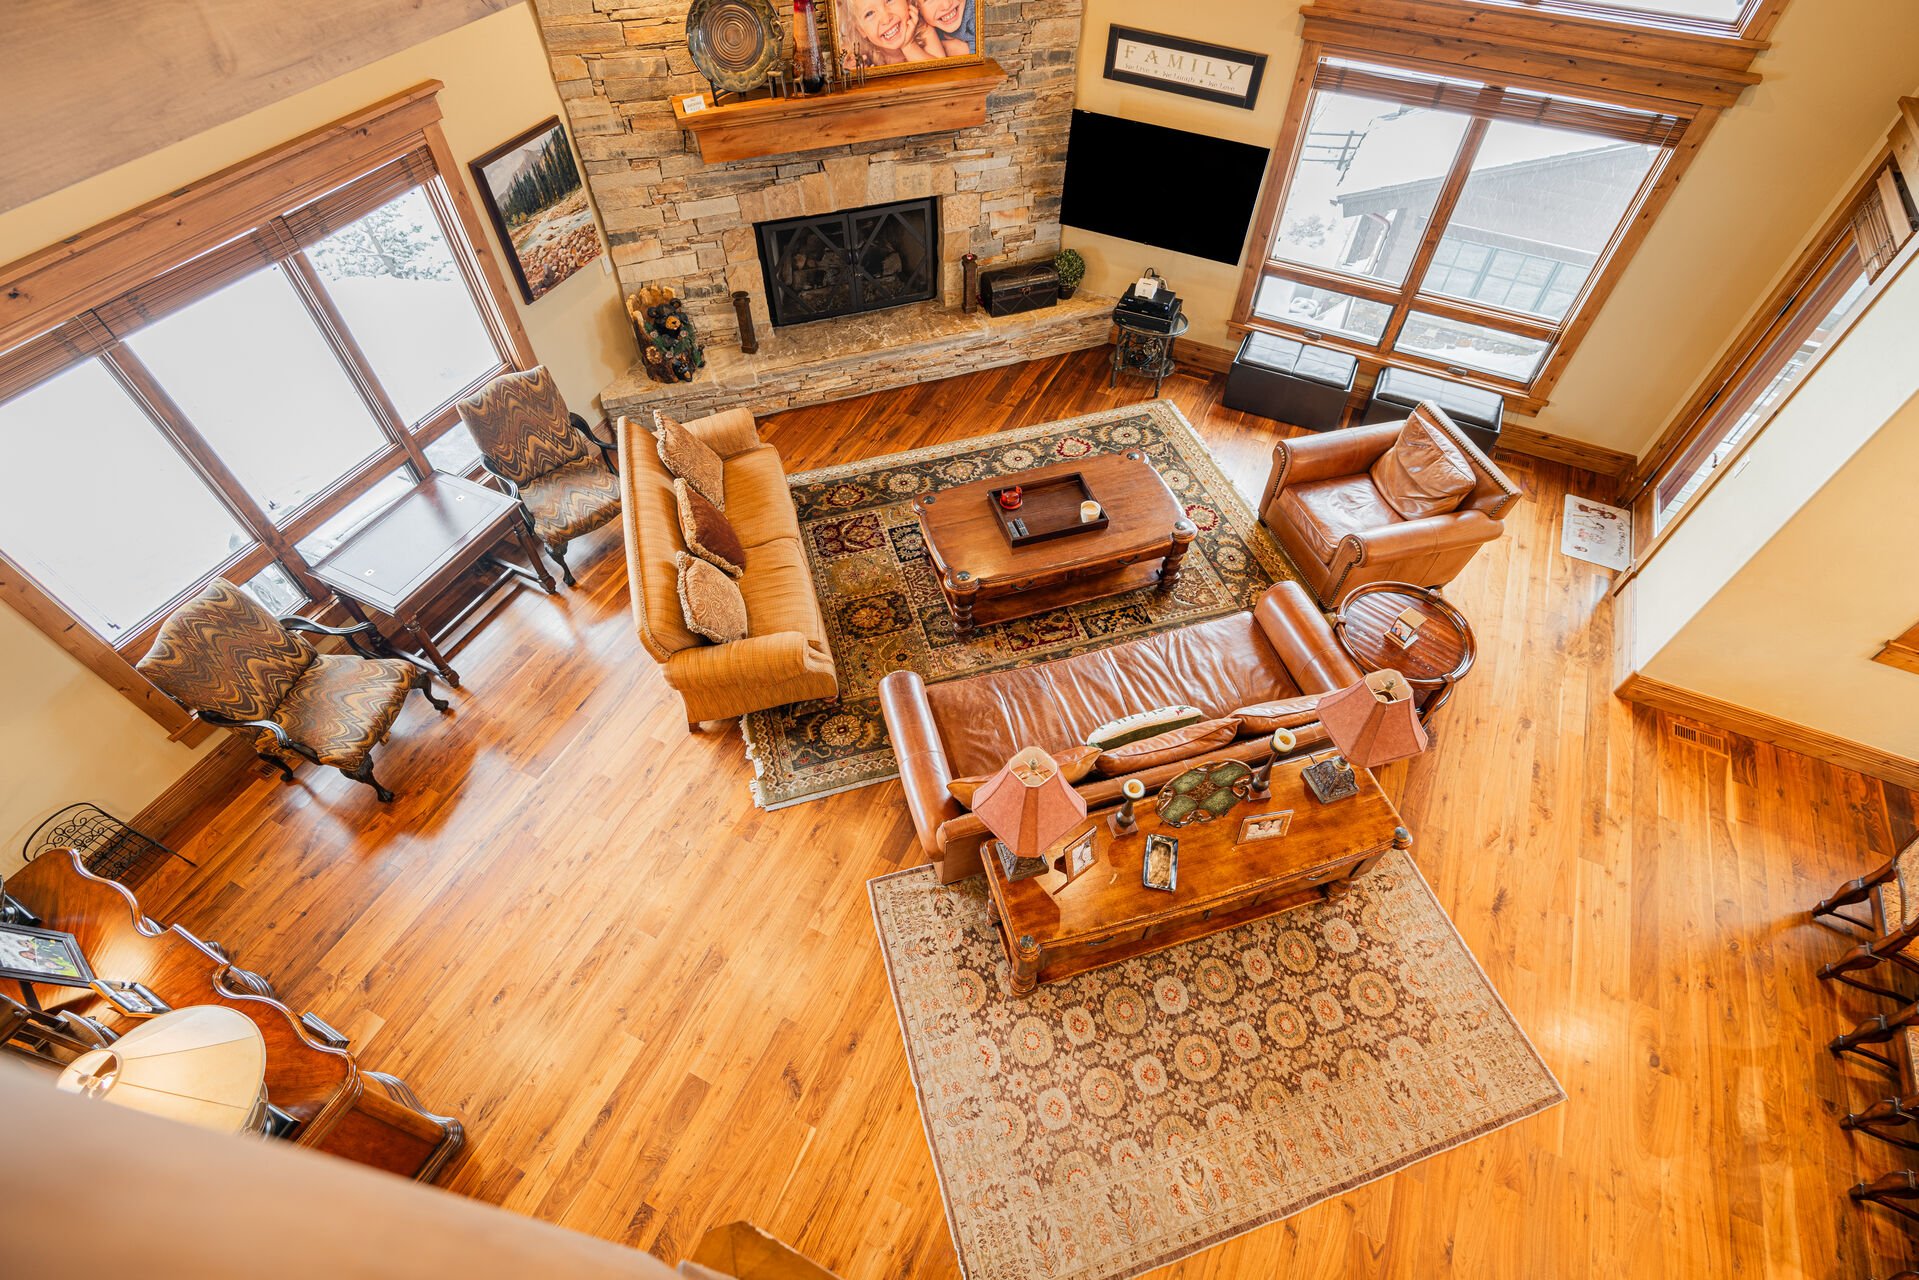 View of the living room from level above